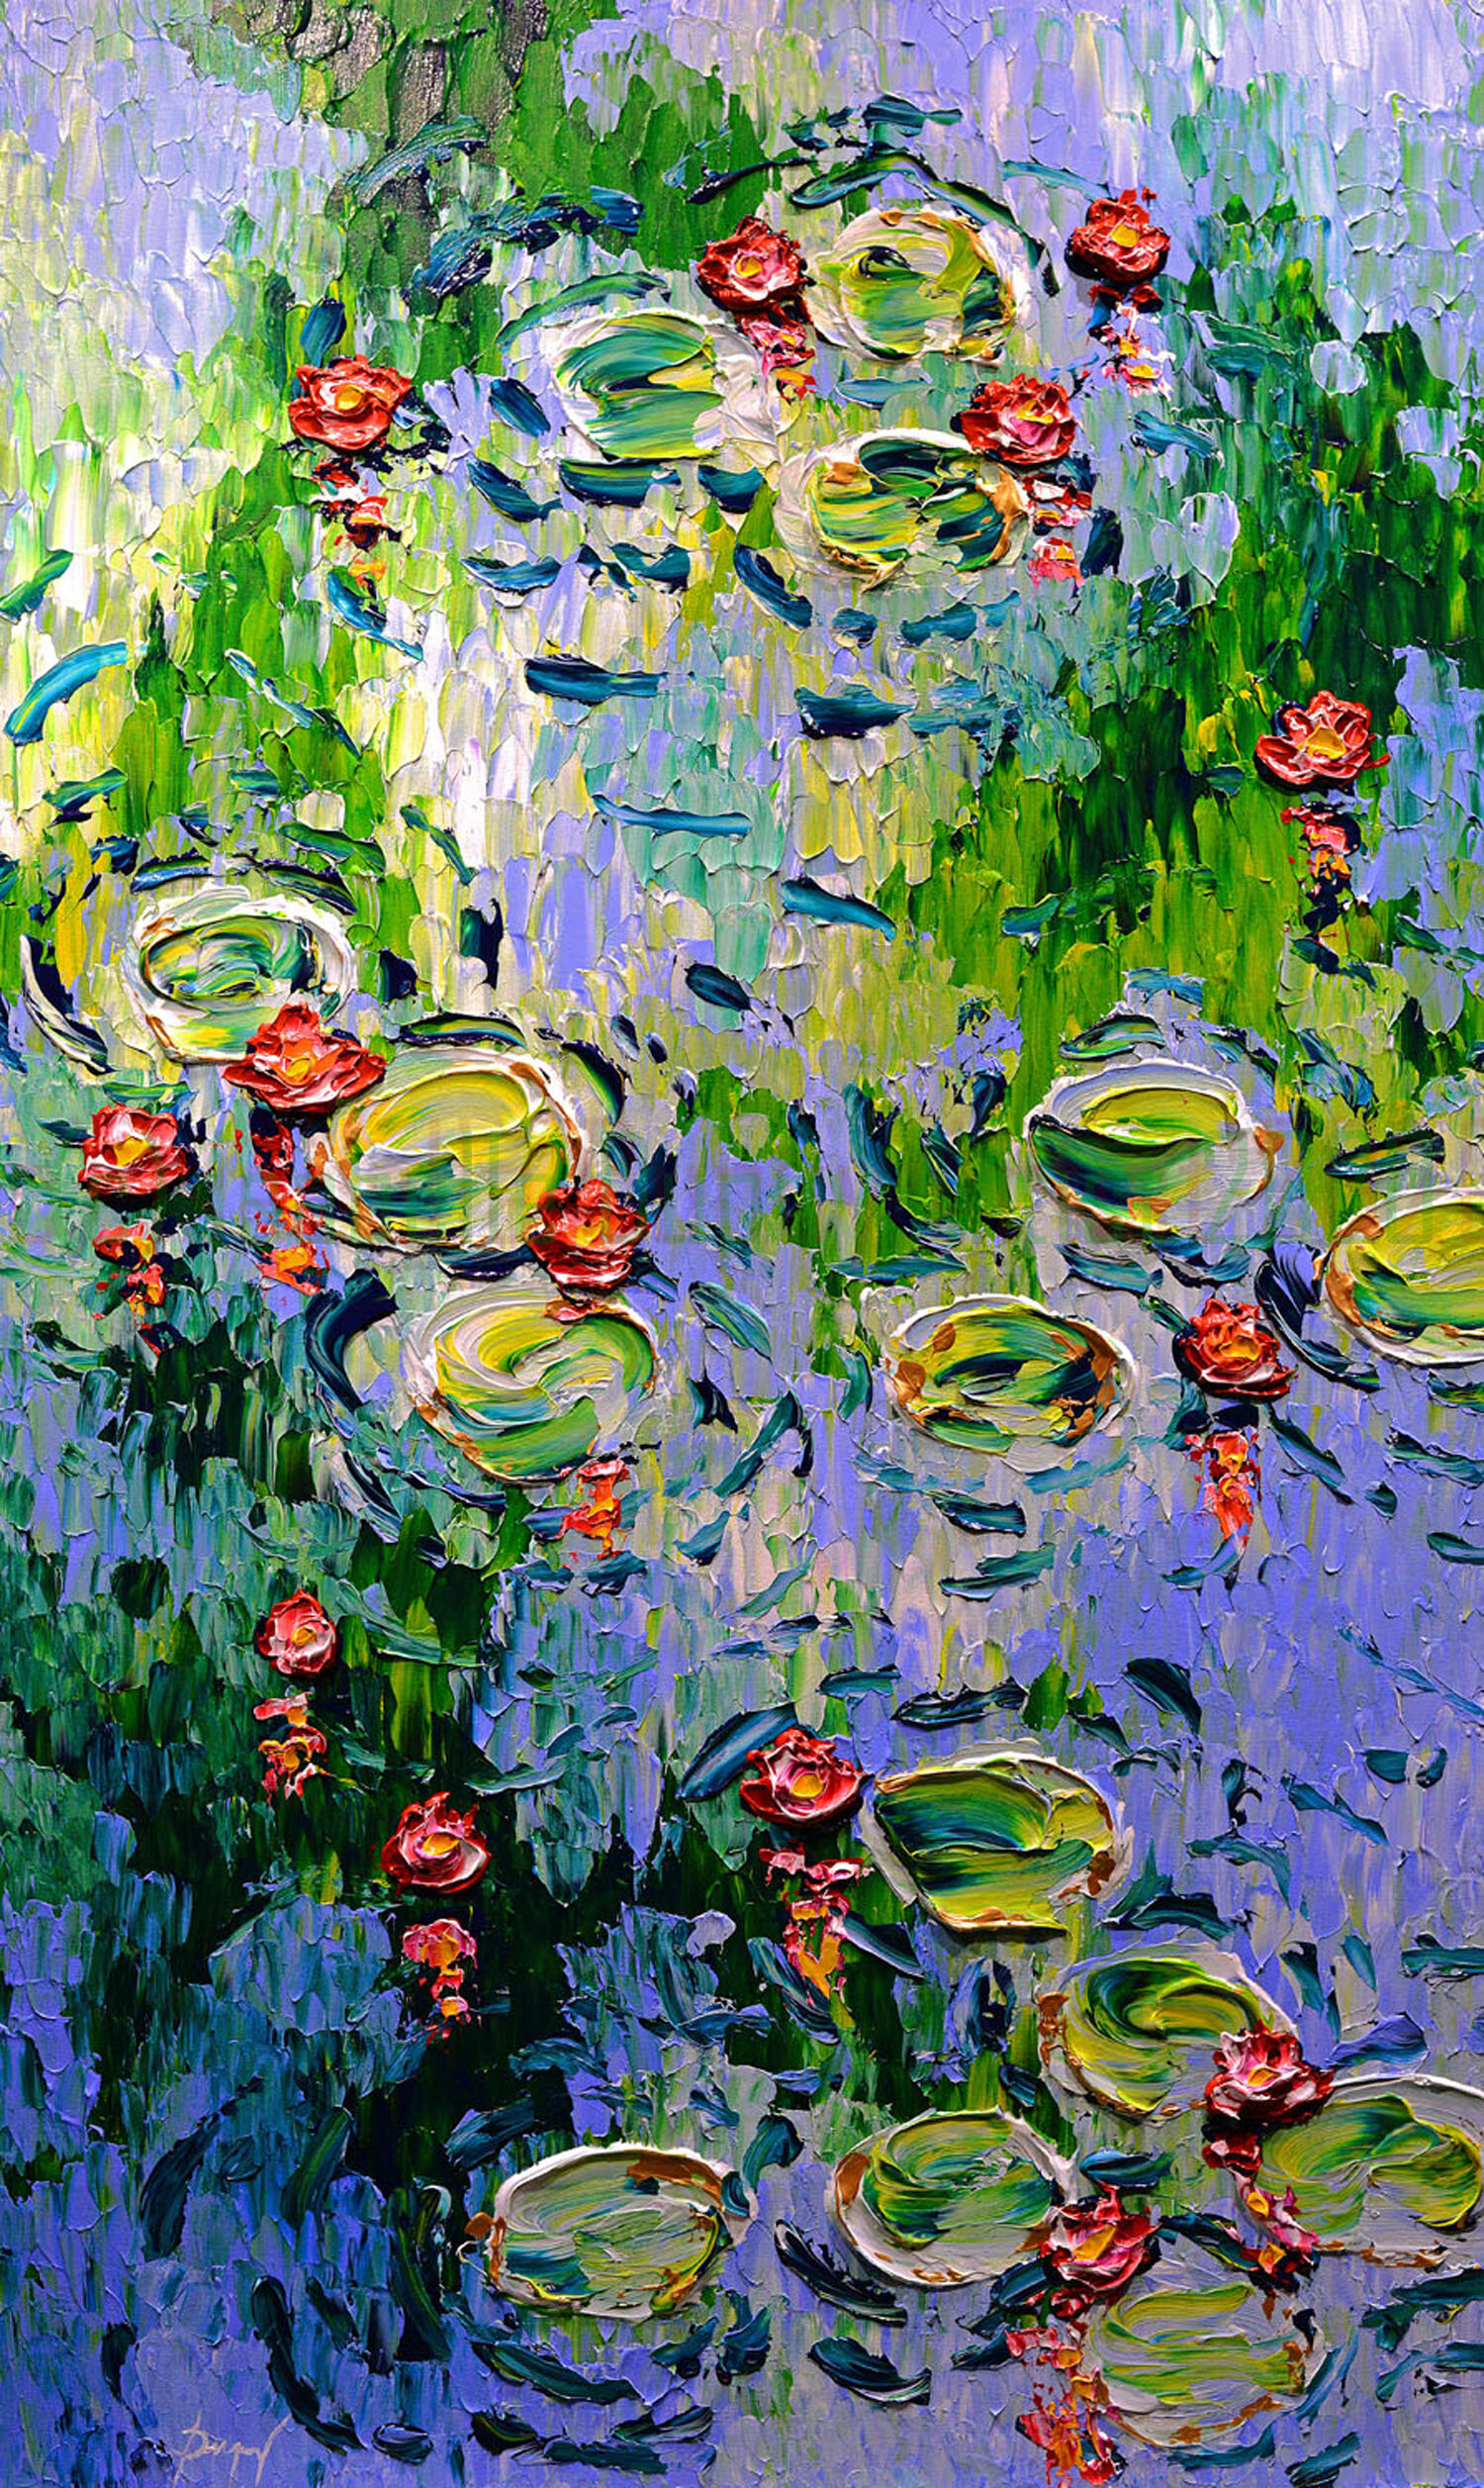 Spring Lilies of Colorful Waters 60x36